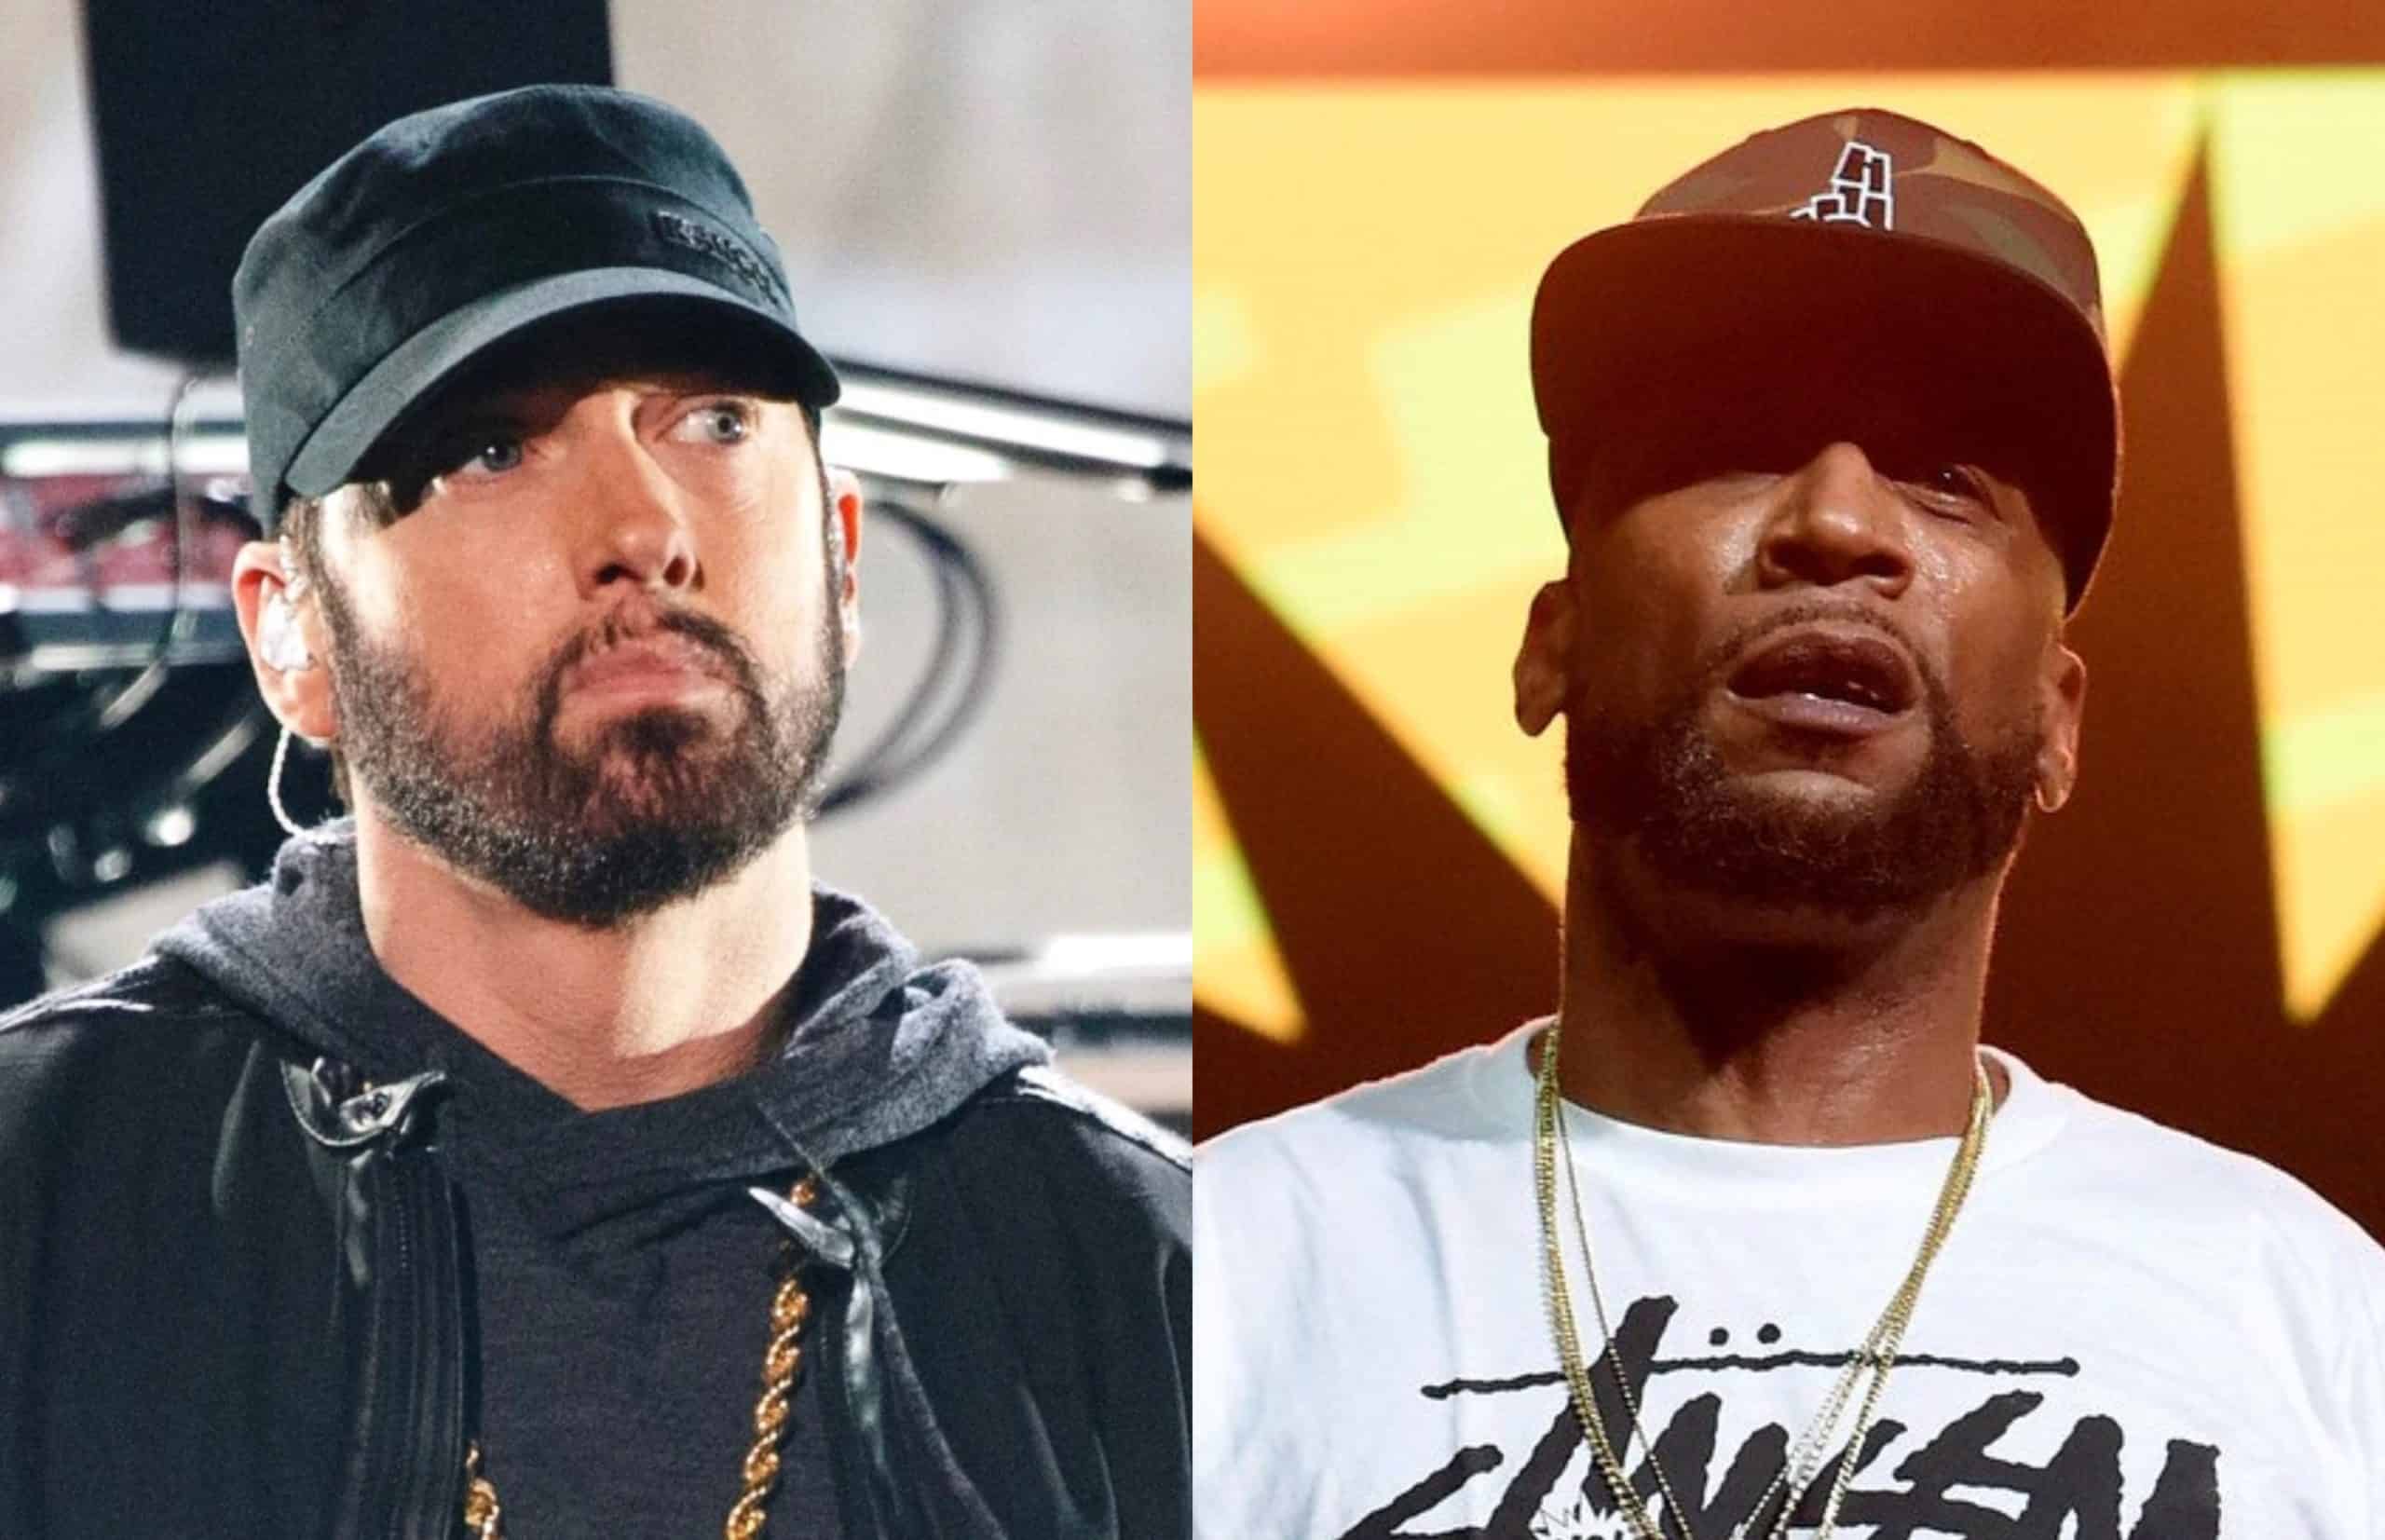 Lord Jamar Talks on Why He Ends His Feud with Eminem